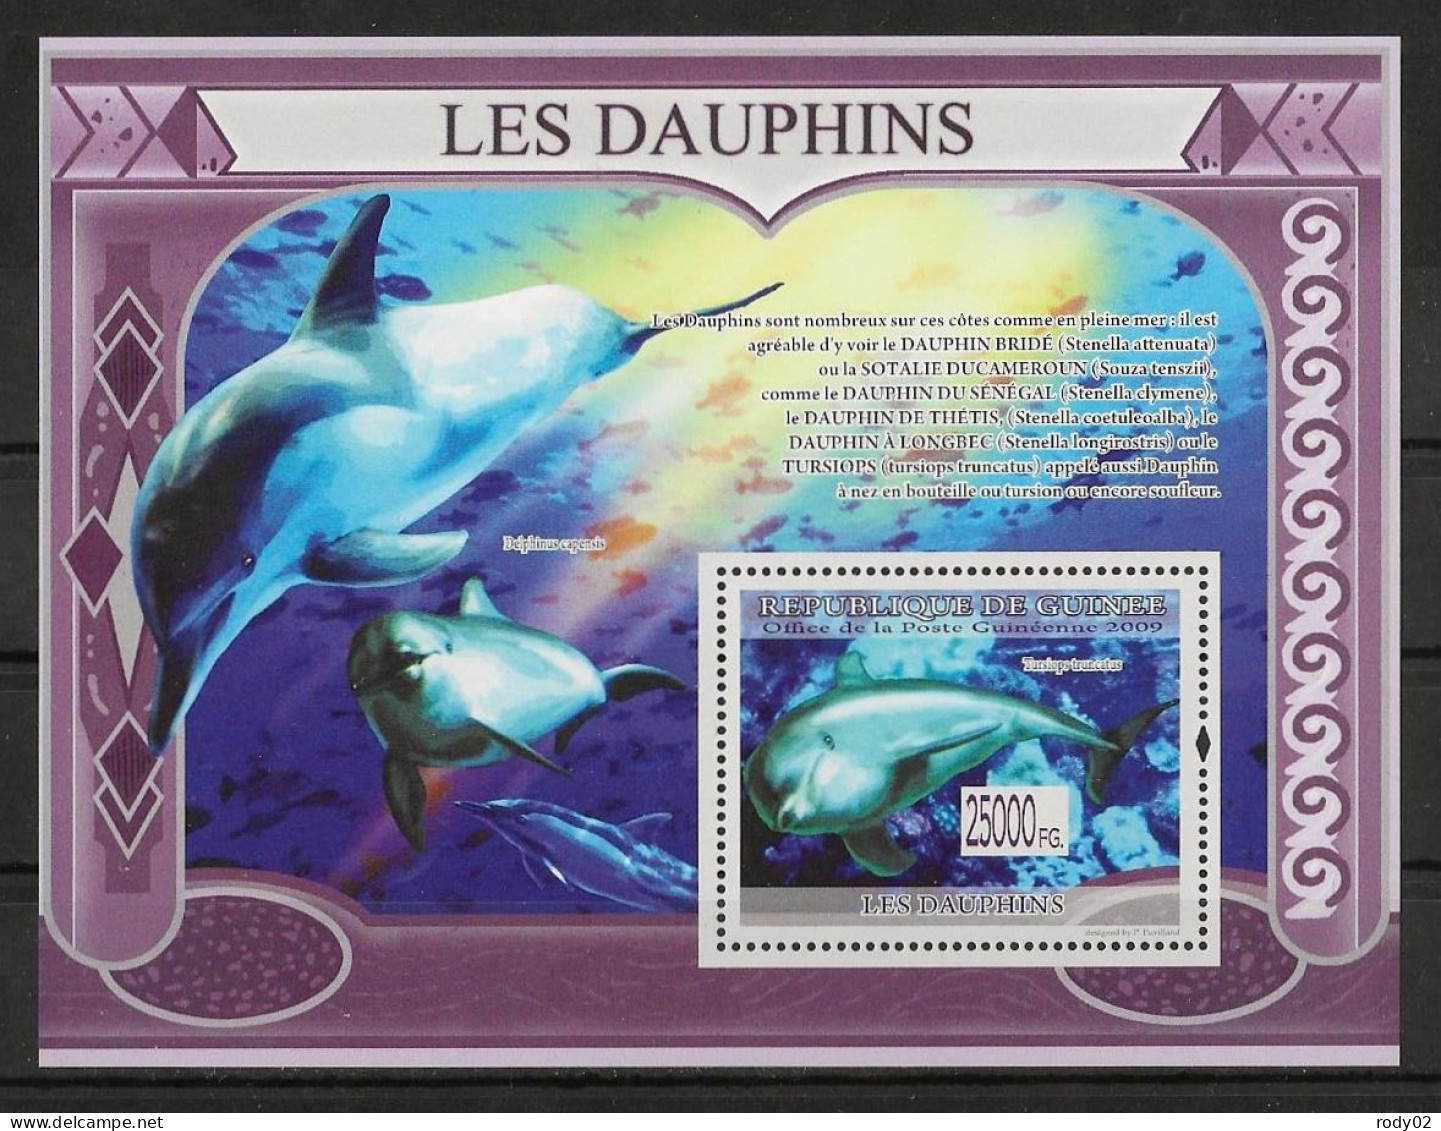 GUINEE - DAUPHINS - N° 4008 A 4013 ET BF 968 - NEUF** MNH - Dolphins